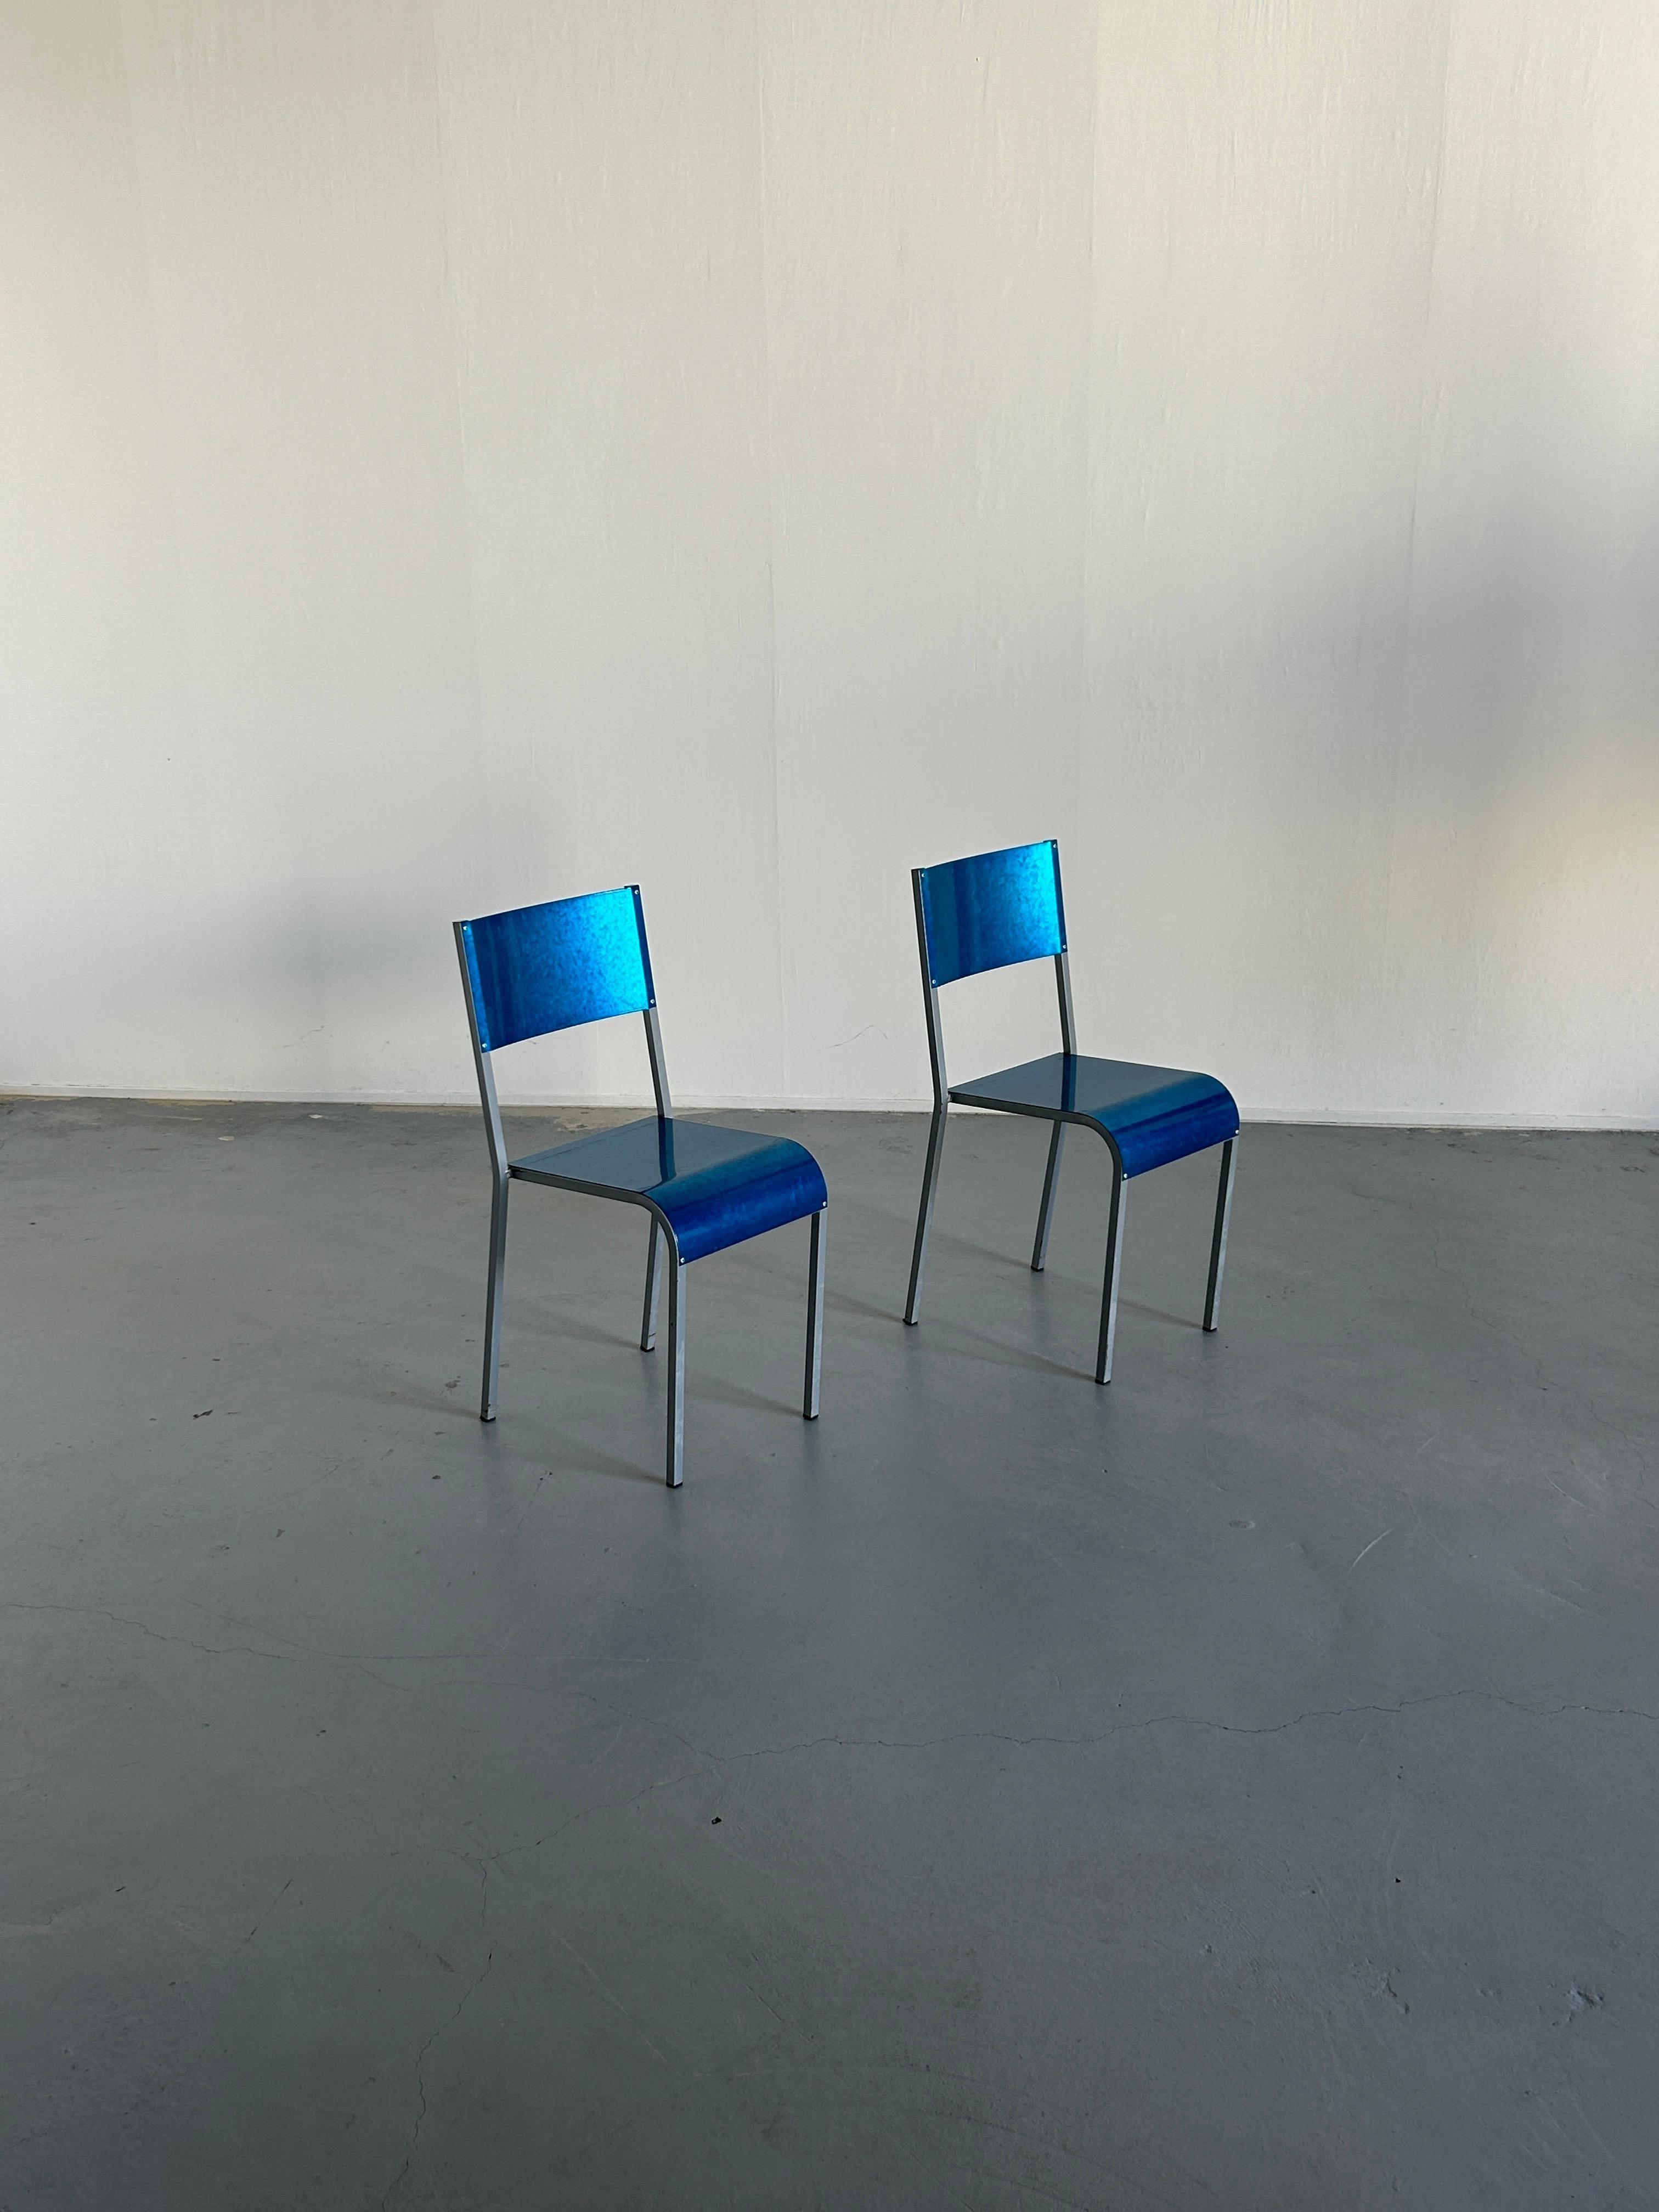 Set of two Mid-century dining chairs by Parisotto, made from an metal base and blue galvanized sheet metal seat and backrset.
A postmodern shape executed in an industrial, all-metal production, manufactured in Italy in the 1980s.

Simple, elegant